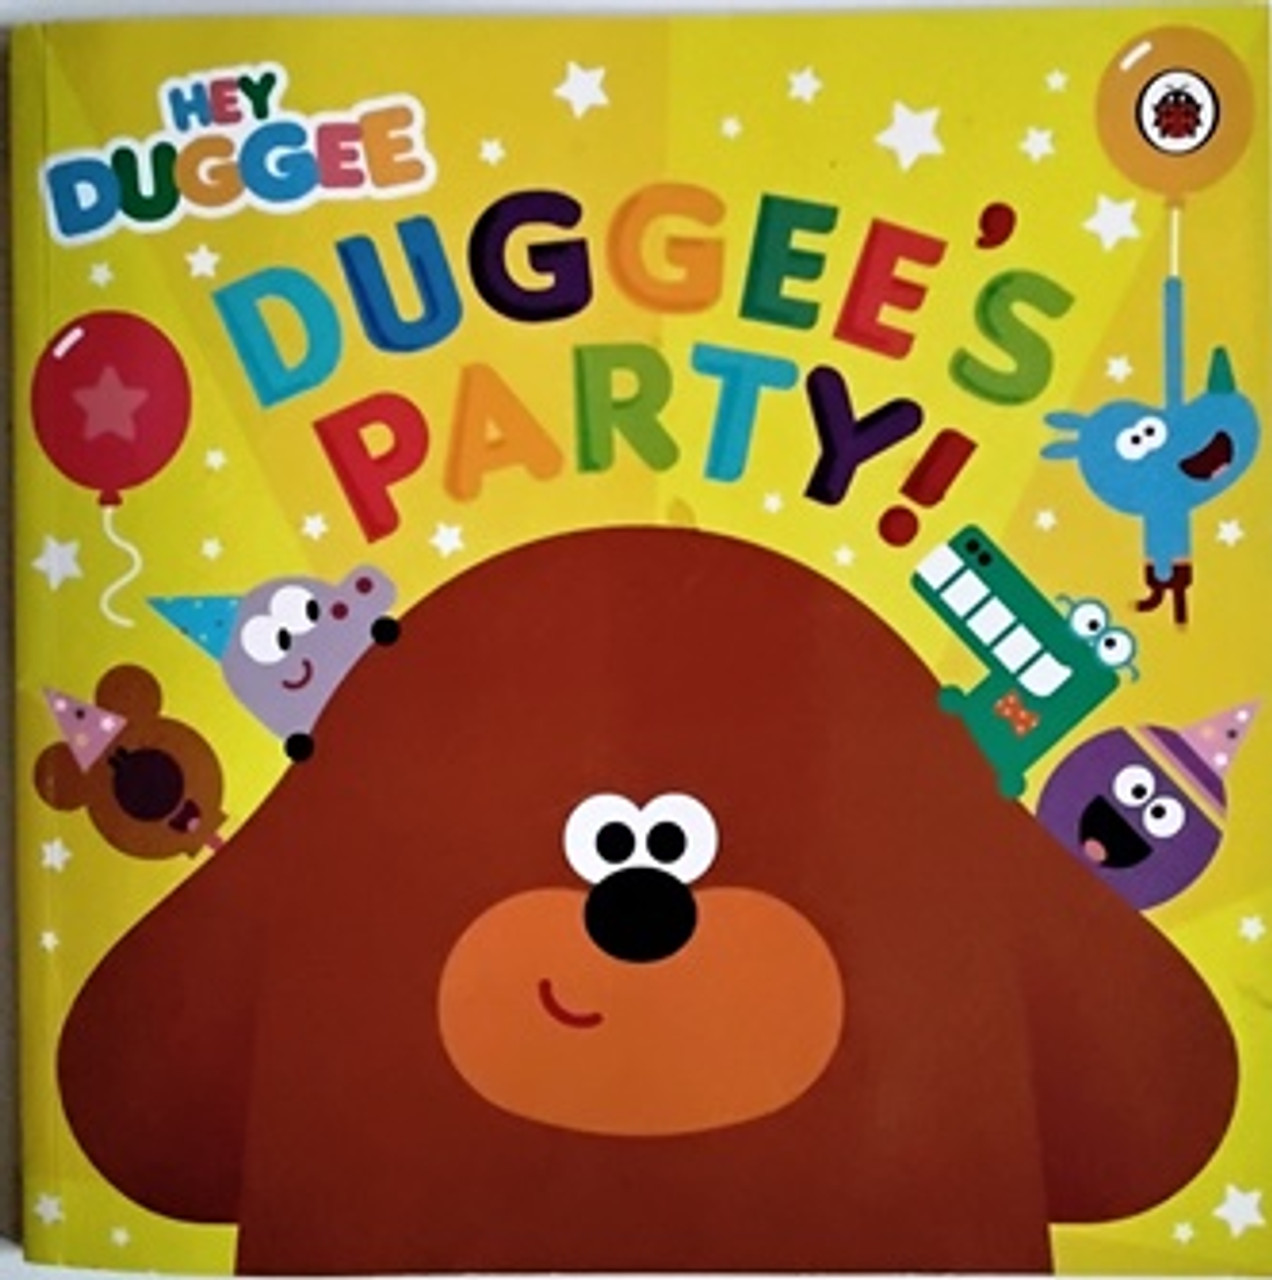 Hey Duggee: Dugee's Party (Children's Picture Book)